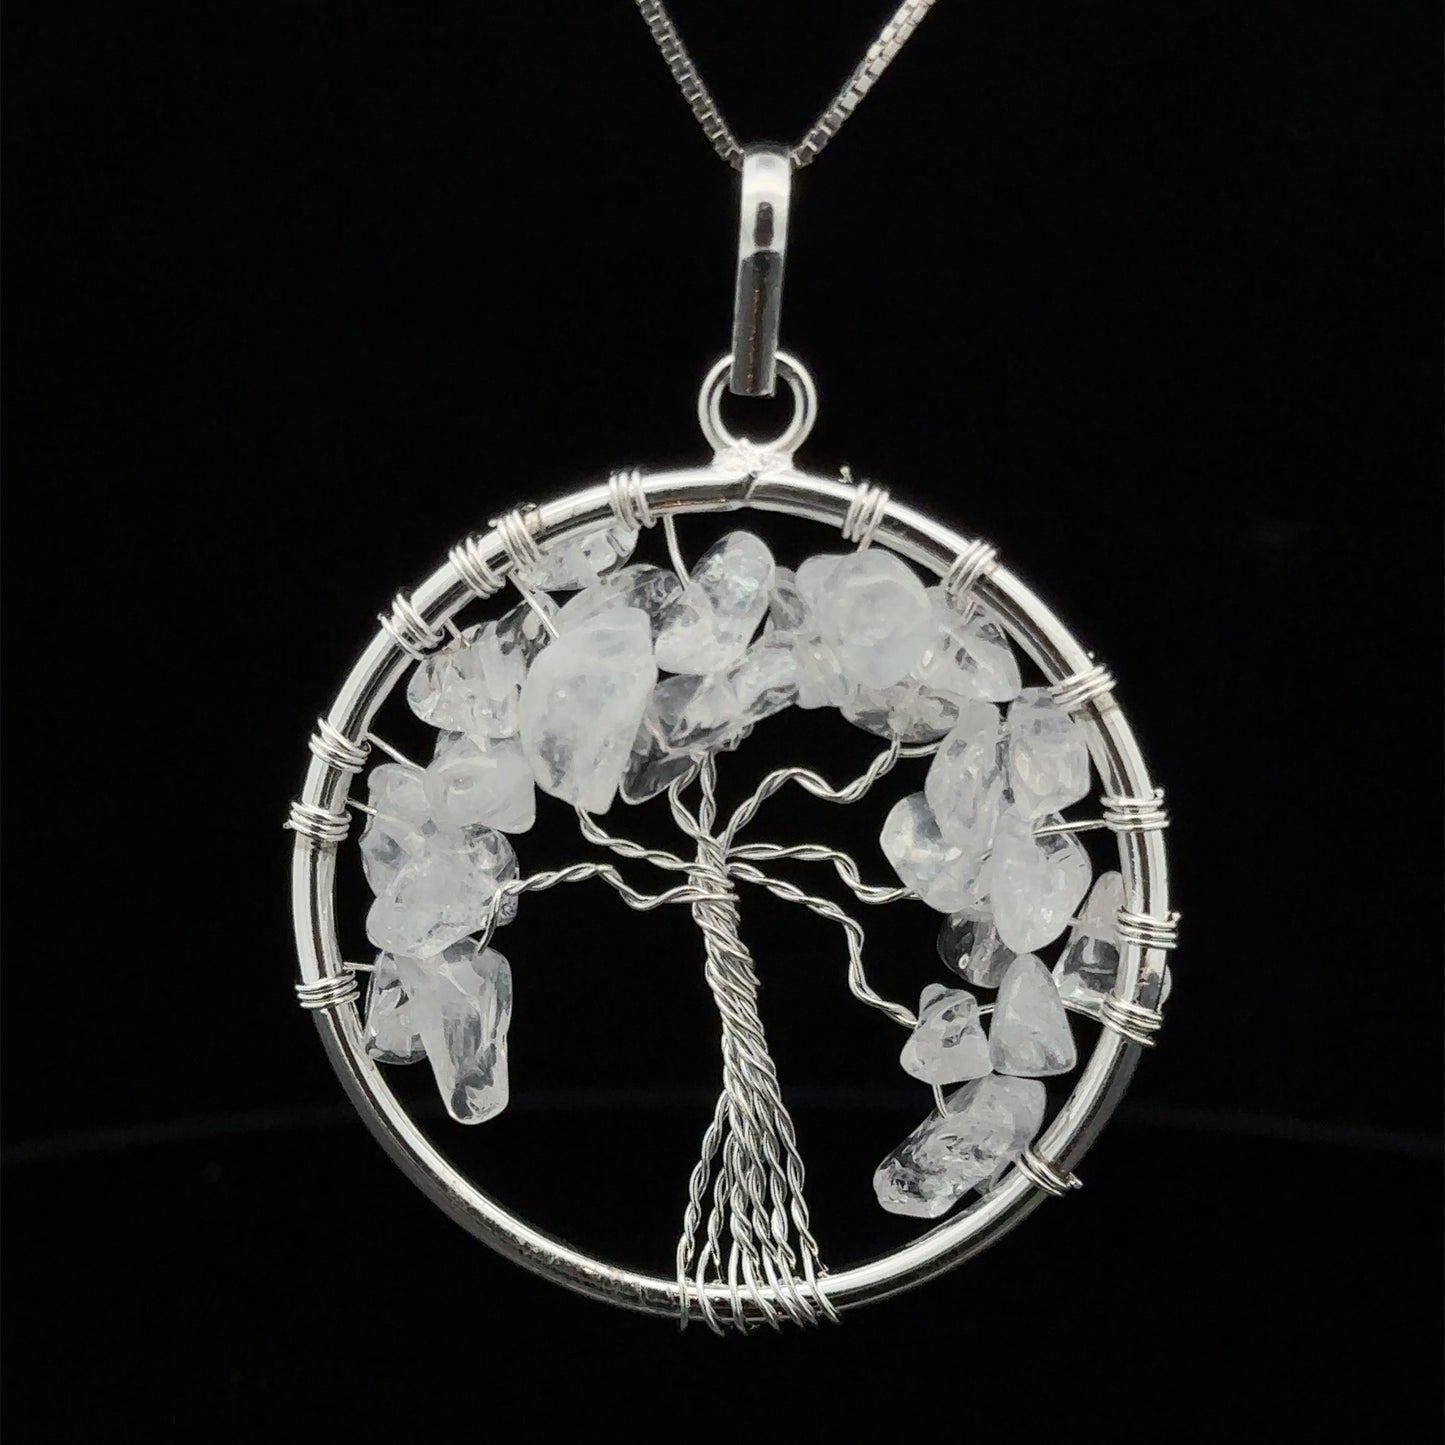 
                  
                    A round silver Wire Wrapped Tree of Life Pendant with Stones features wire-wrapped branches adorned with clear gemstones. The pendant hangs from a silver chain against a black background.
                  
                